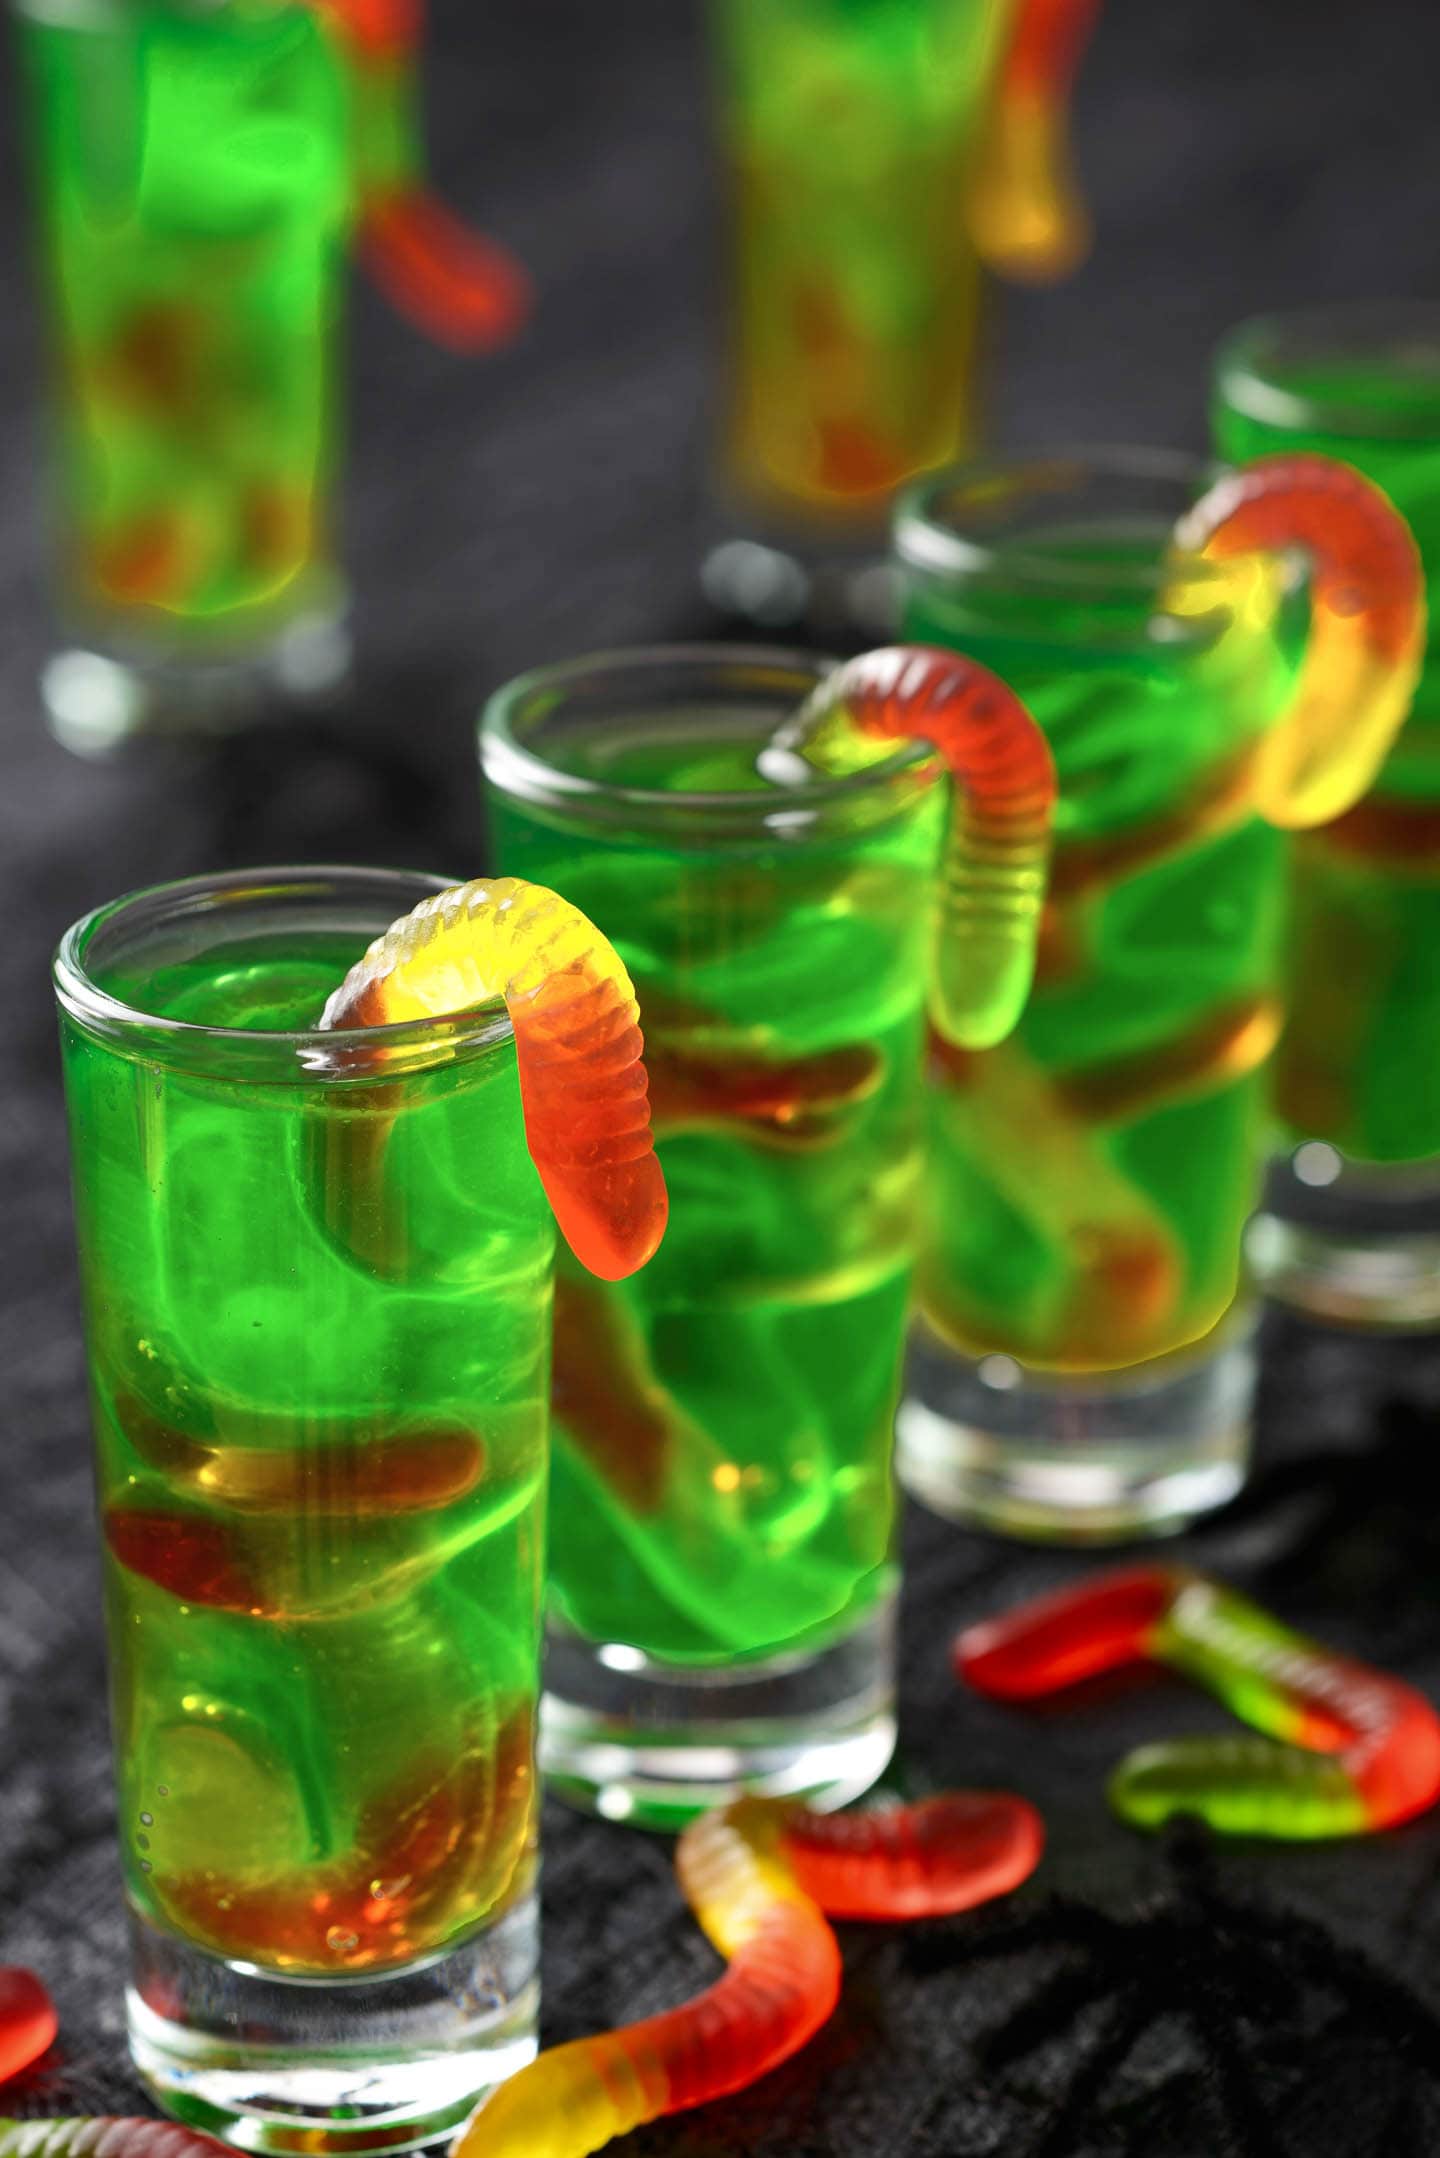 Green Halloween Jello shots with gummy worms